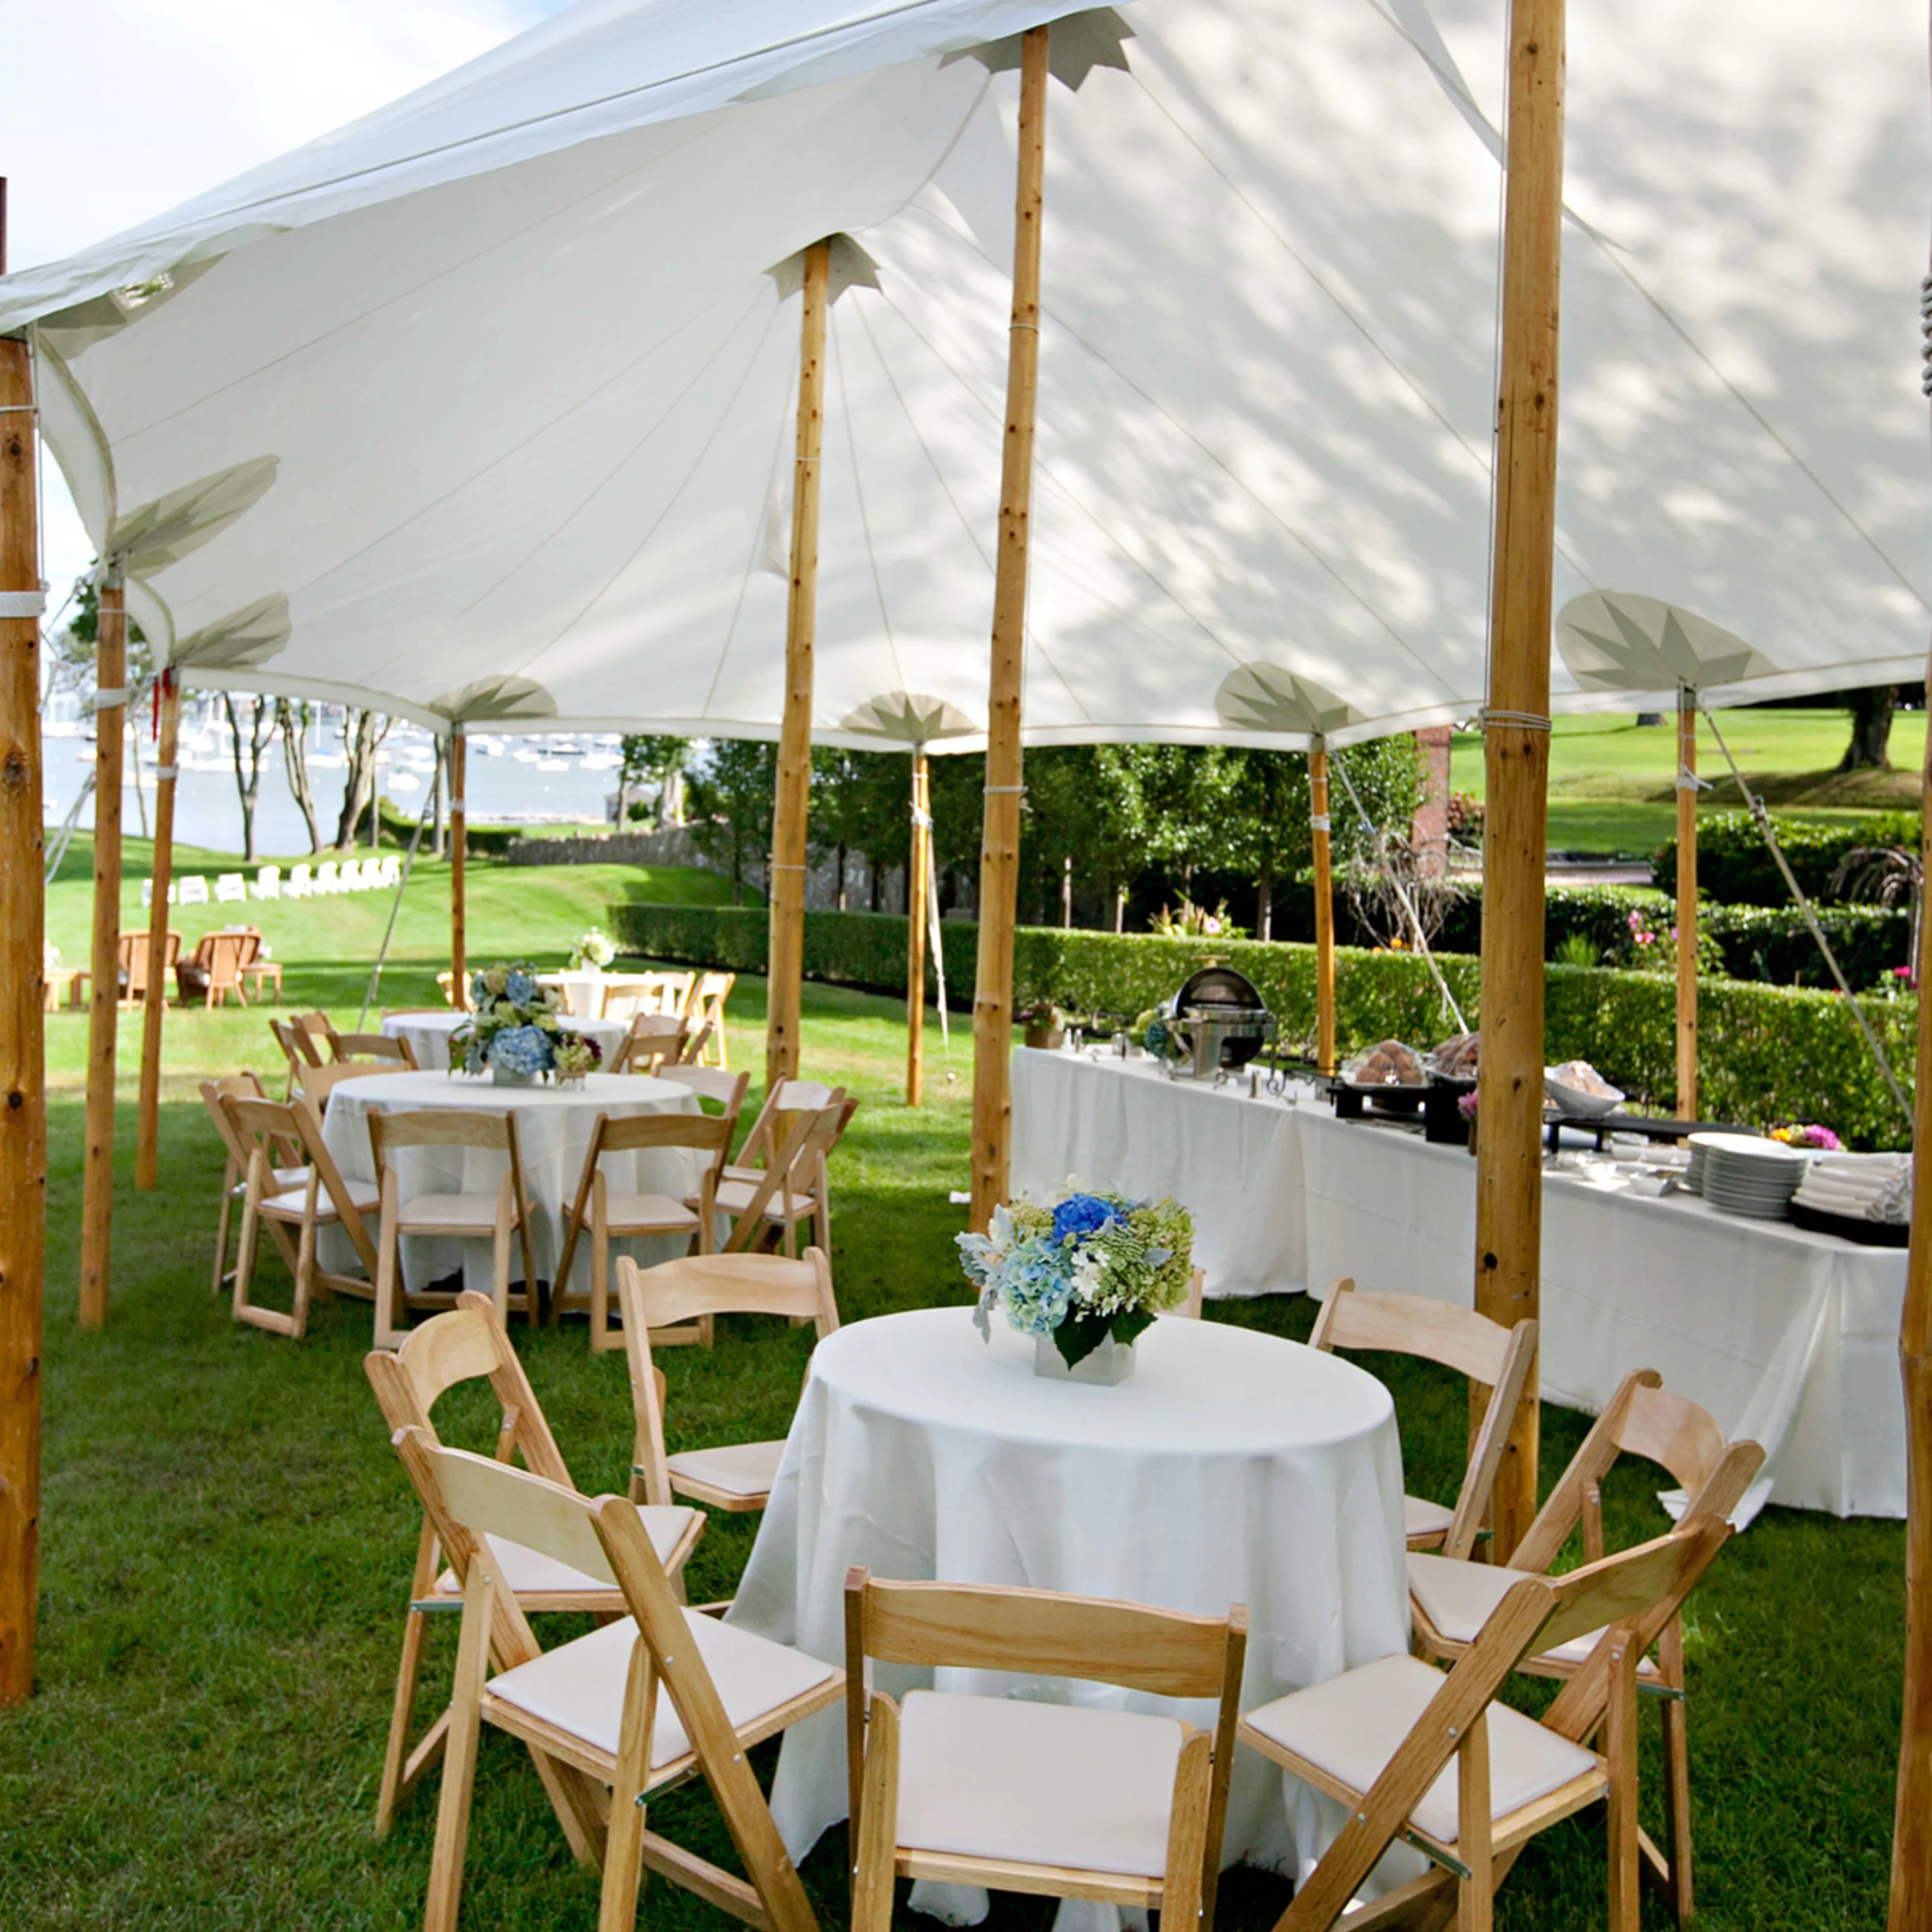 Outdoor Event Space (peakeventservices.com)